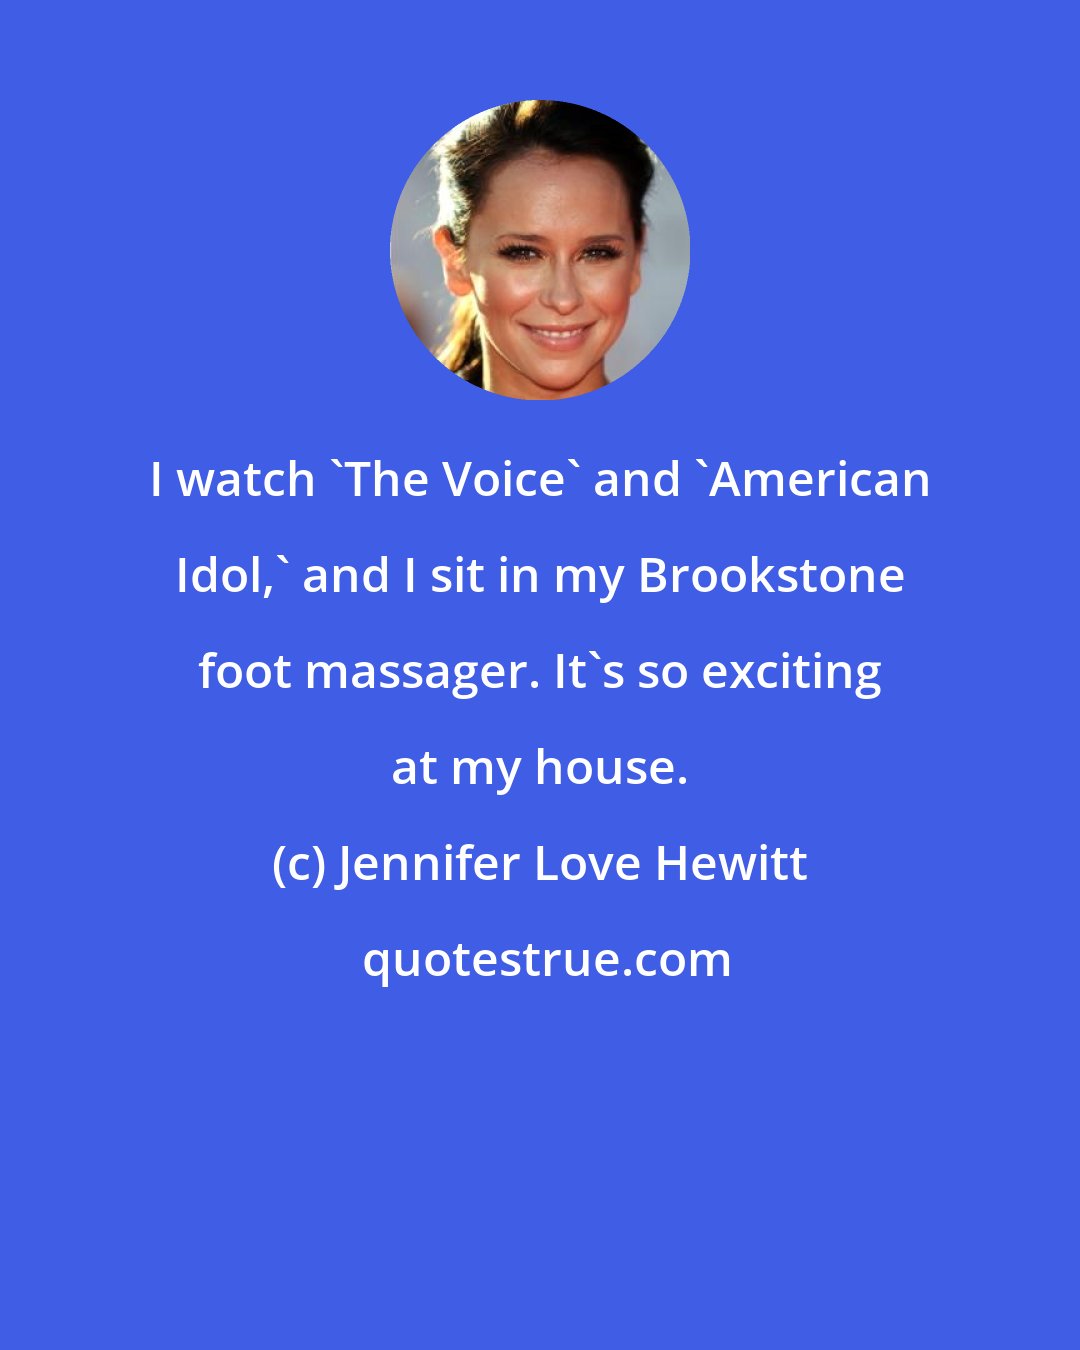 Jennifer Love Hewitt: I watch 'The Voice' and 'American Idol,' and I sit in my Brookstone foot massager. It's so exciting at my house.